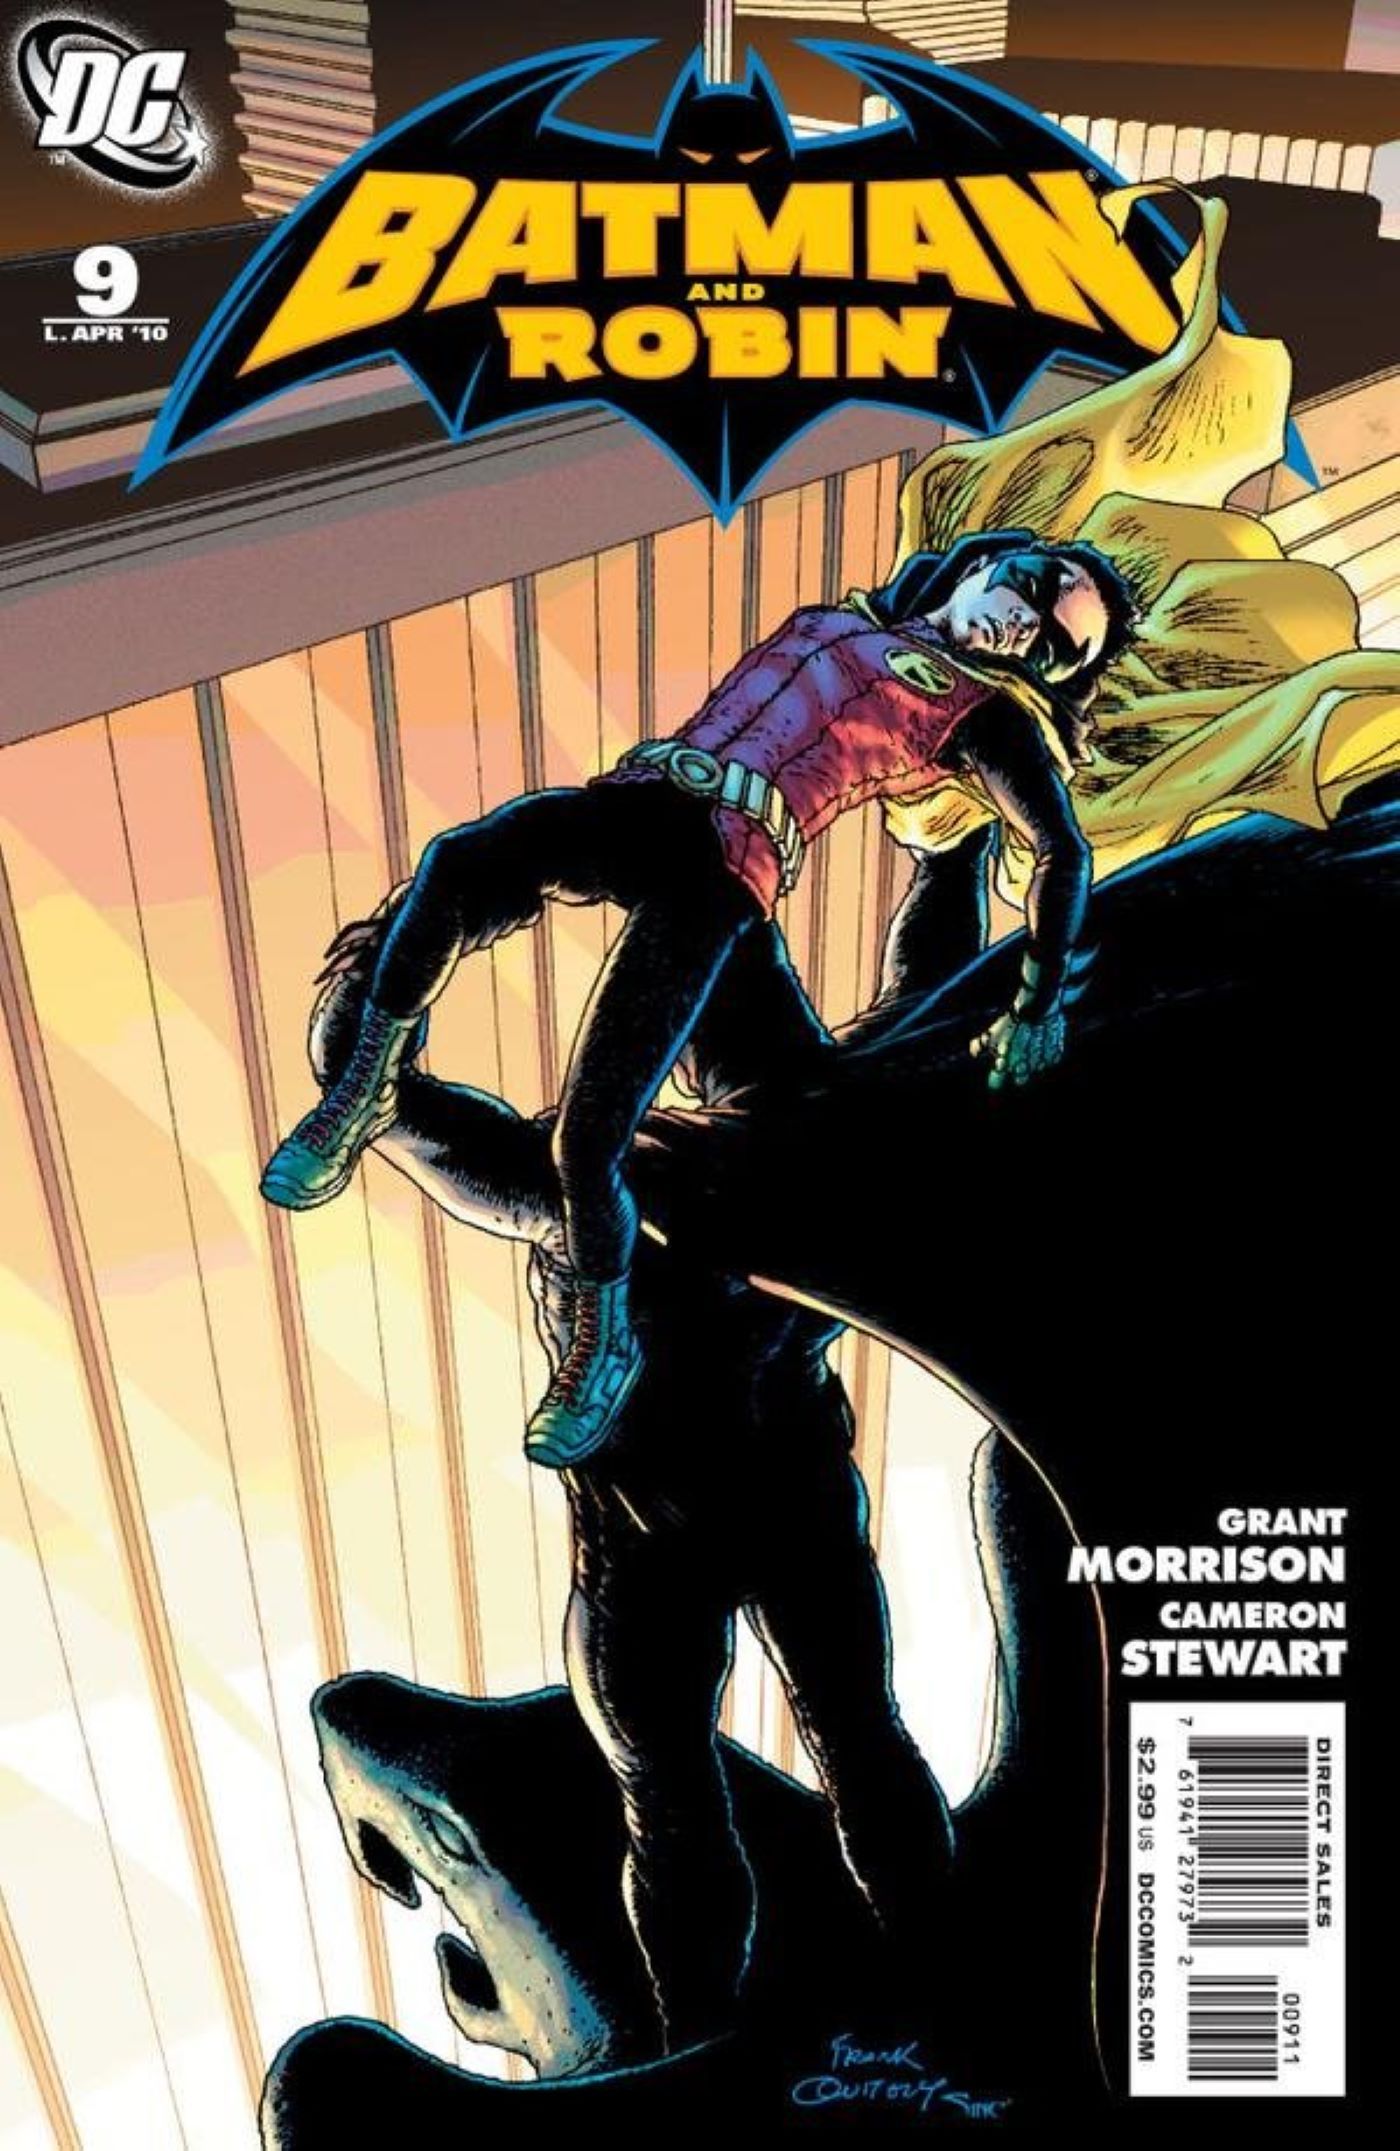 Batman and Robin #9 cover of Batman throwing Damian Wayne off a roof (Morrison and Quitely)-2